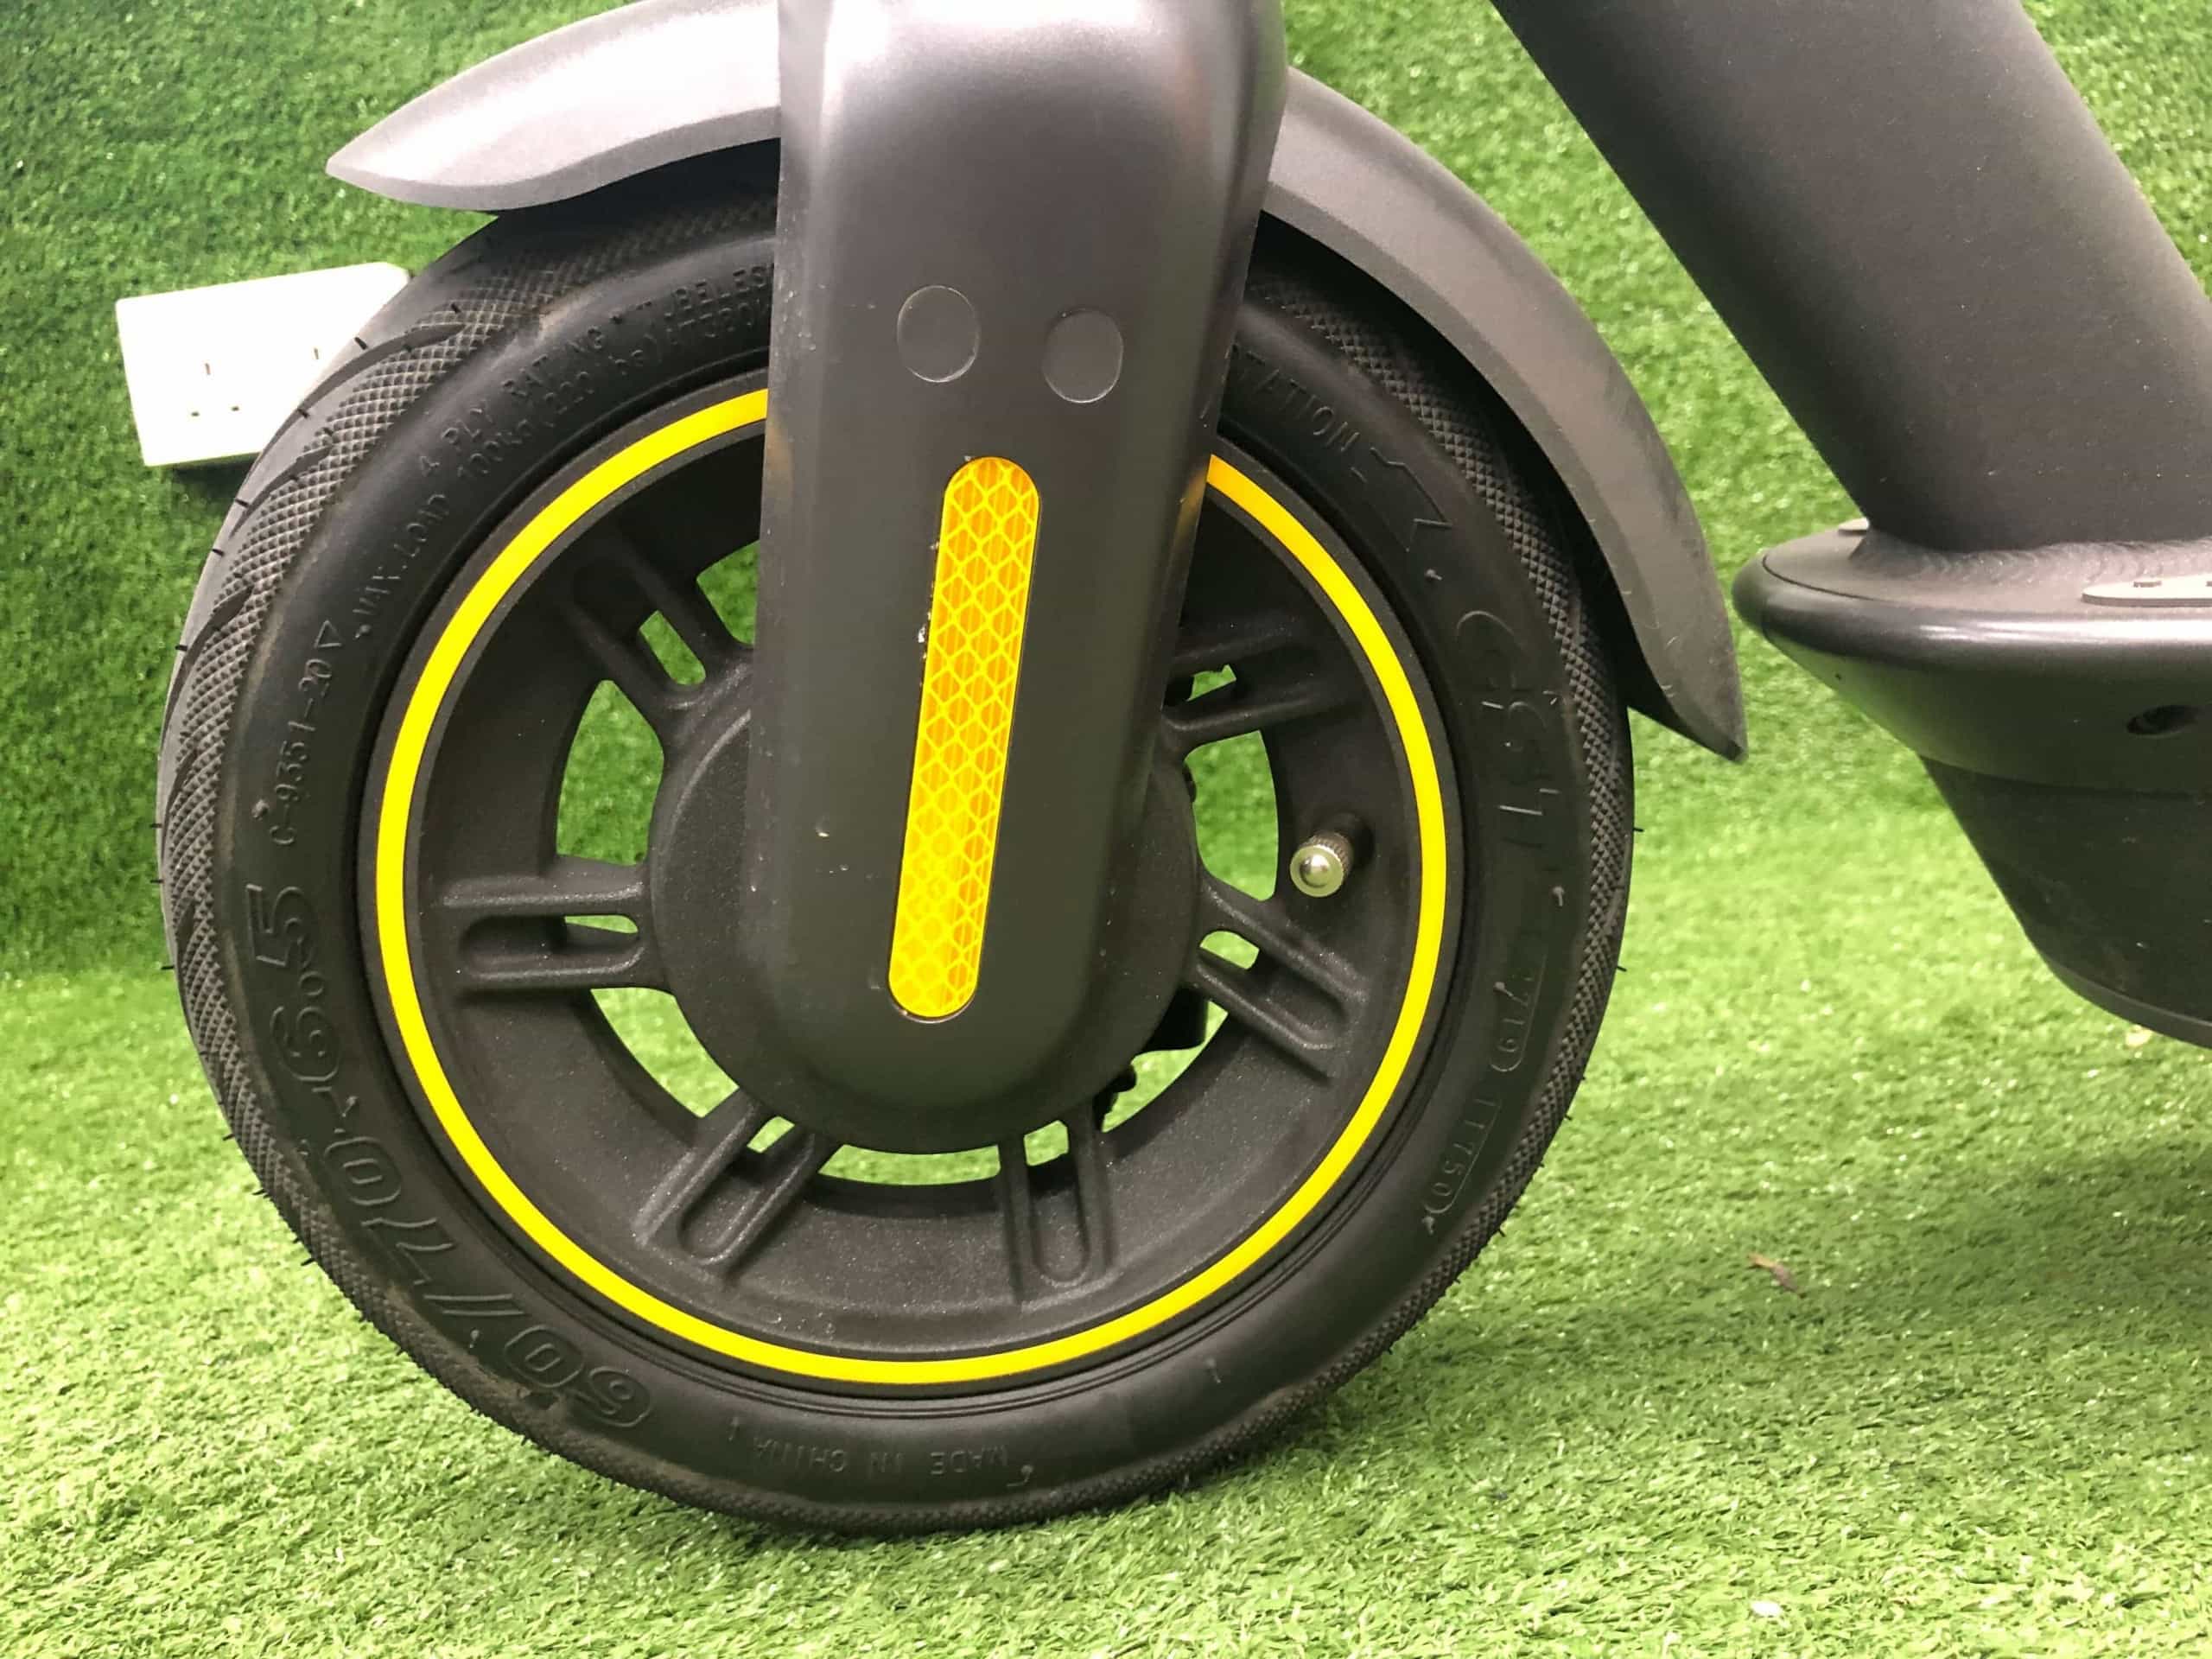 NINEBOT MAX UL2272 certified electric scooter pneumatic tubless tyres scaled - Is NINEBOT MAX the best e-scooter released in 2019?